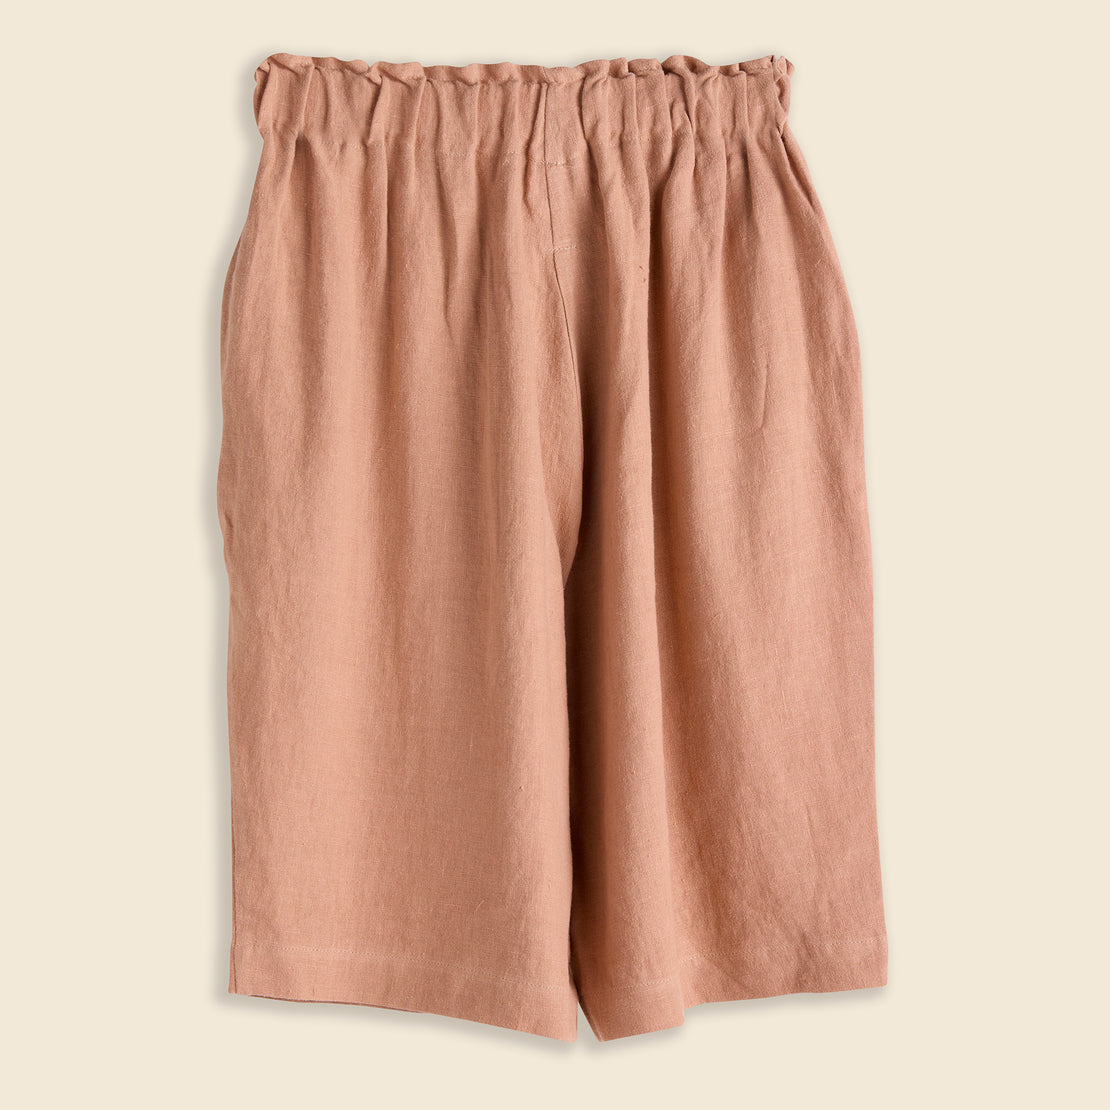 Milula Short - Hazel - Limo - STAG Provisions - W - Shorts - Solid